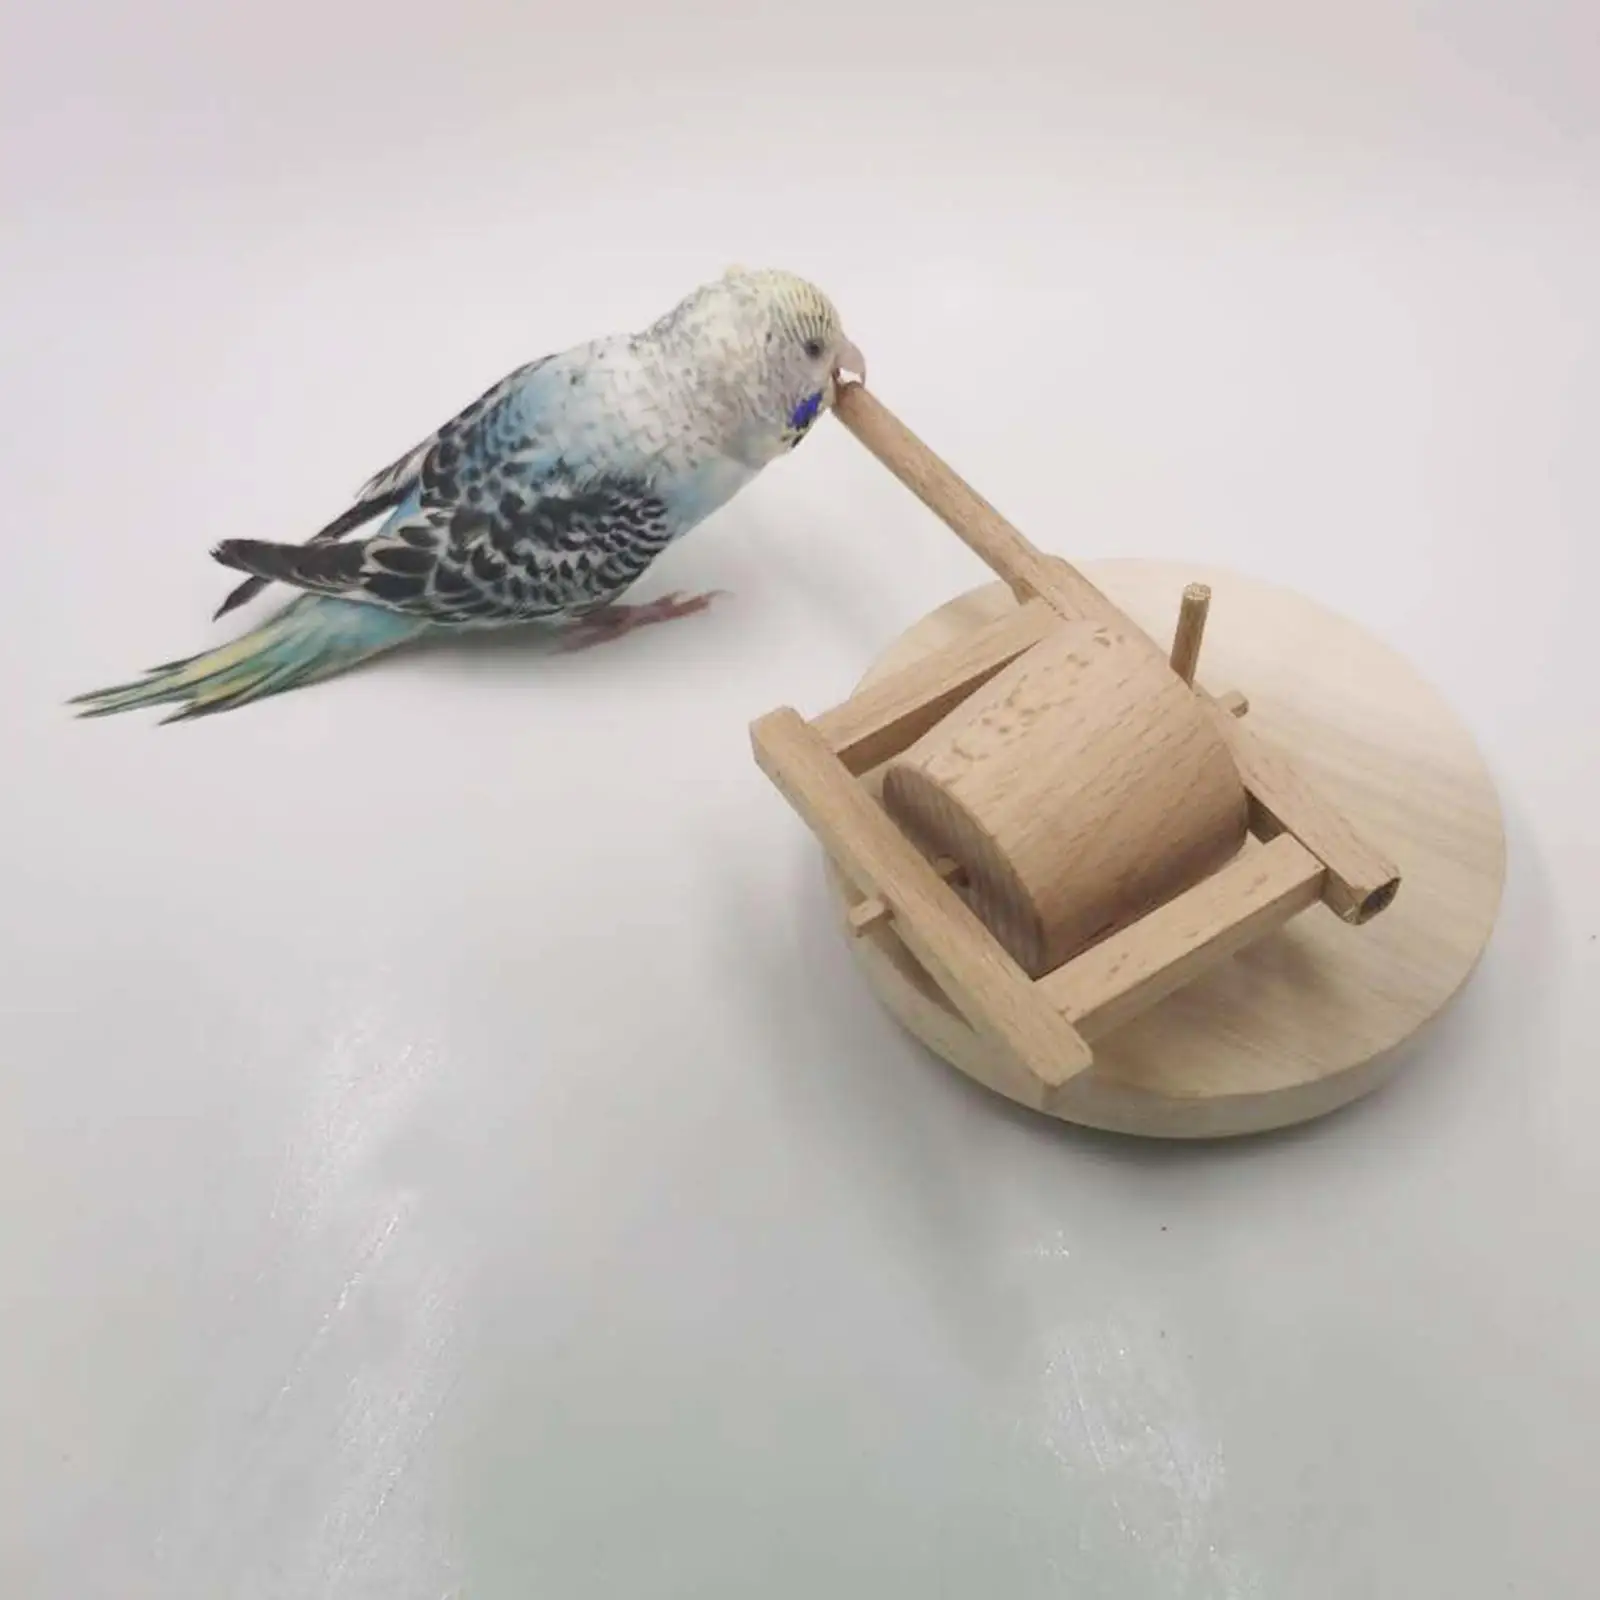 Parrot Stone Mill Toy Wood Learning Enrichment Toy Pet Supplies Cockatoo Quaker Macaw Intelligence Toy for Small Medium Birds